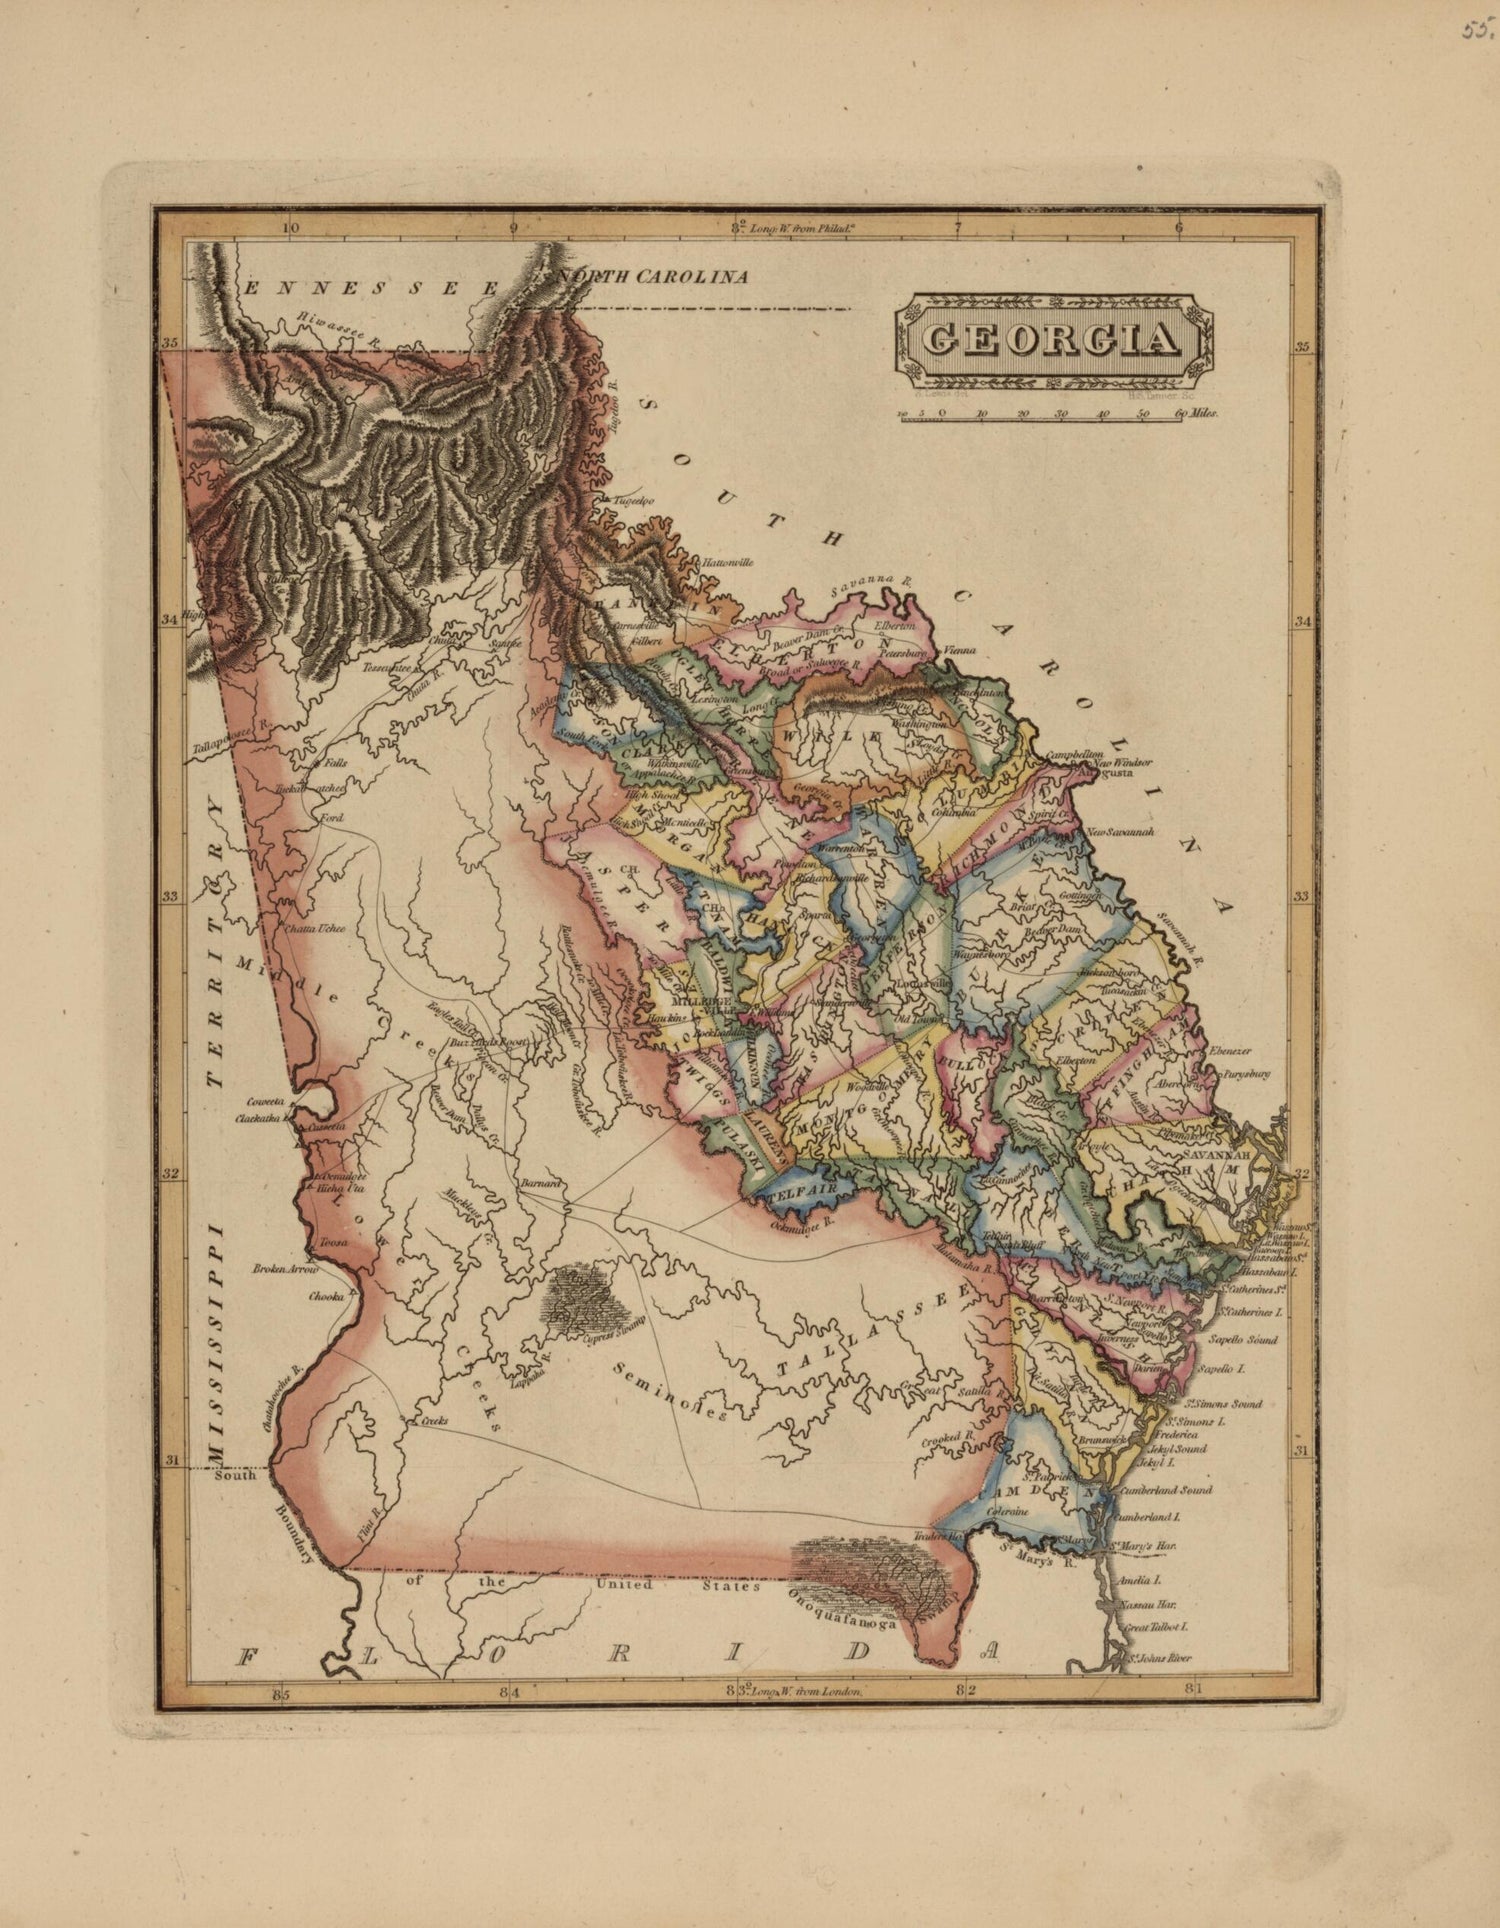 This old map of Georgia from a New and Elegant General Atlas, Containing Maps of Each of the United States  from 1817 was created by Henry Schenck Tanner in 1817